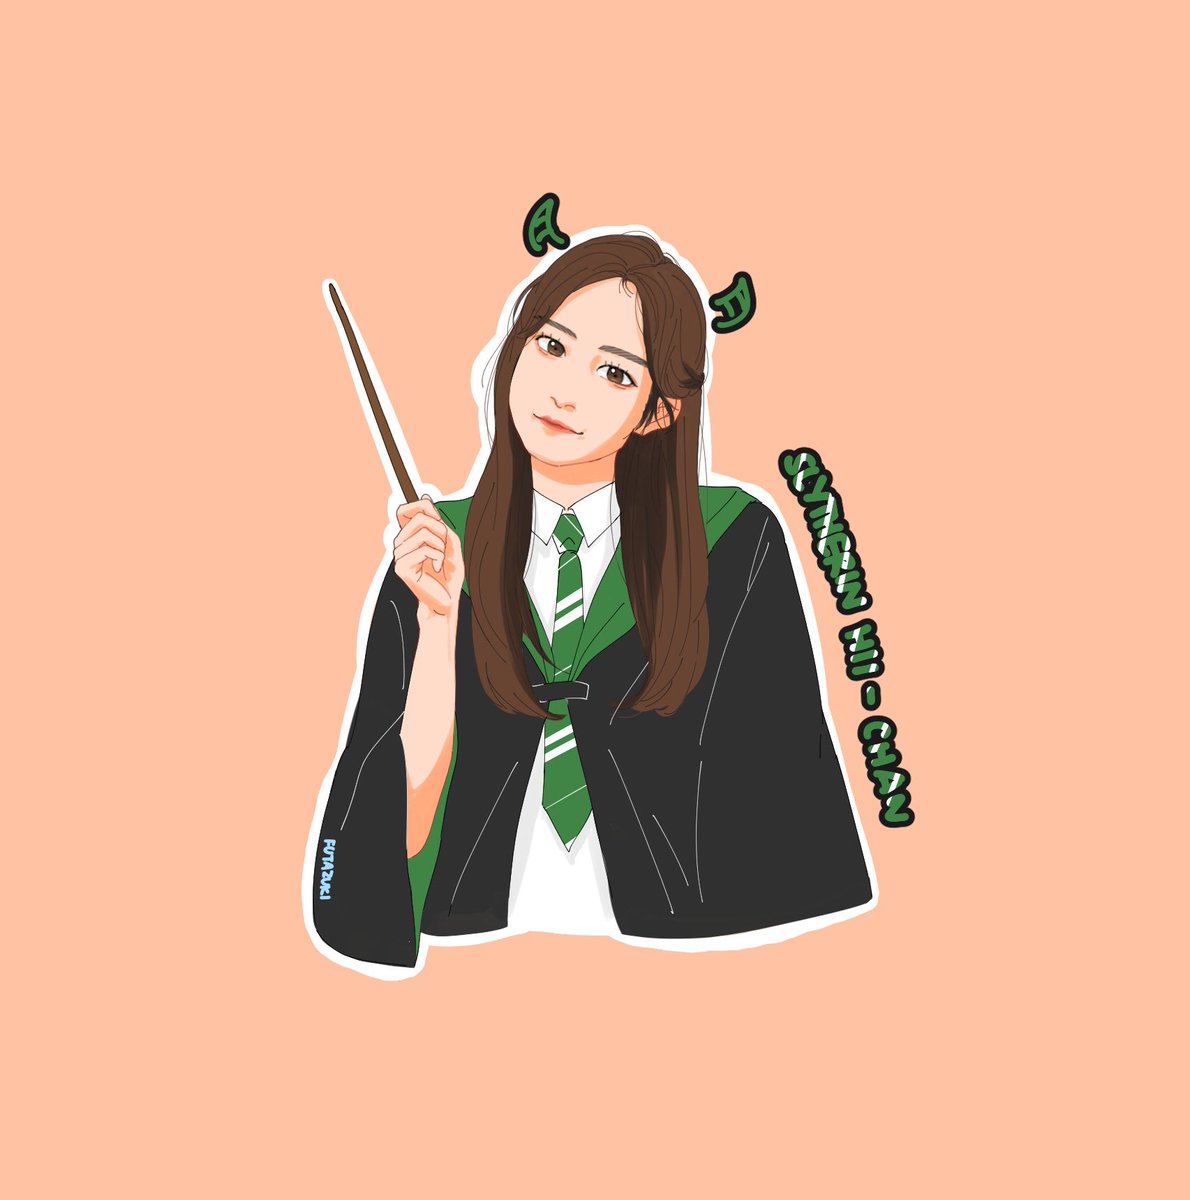 Hitomi: SlytherinIs loved for her cute appearance, but can be snarky and can’t tolerate nonsense towards her. Takes Potion classes. #HondaHitomi  #本田仁美  #혼다히토미